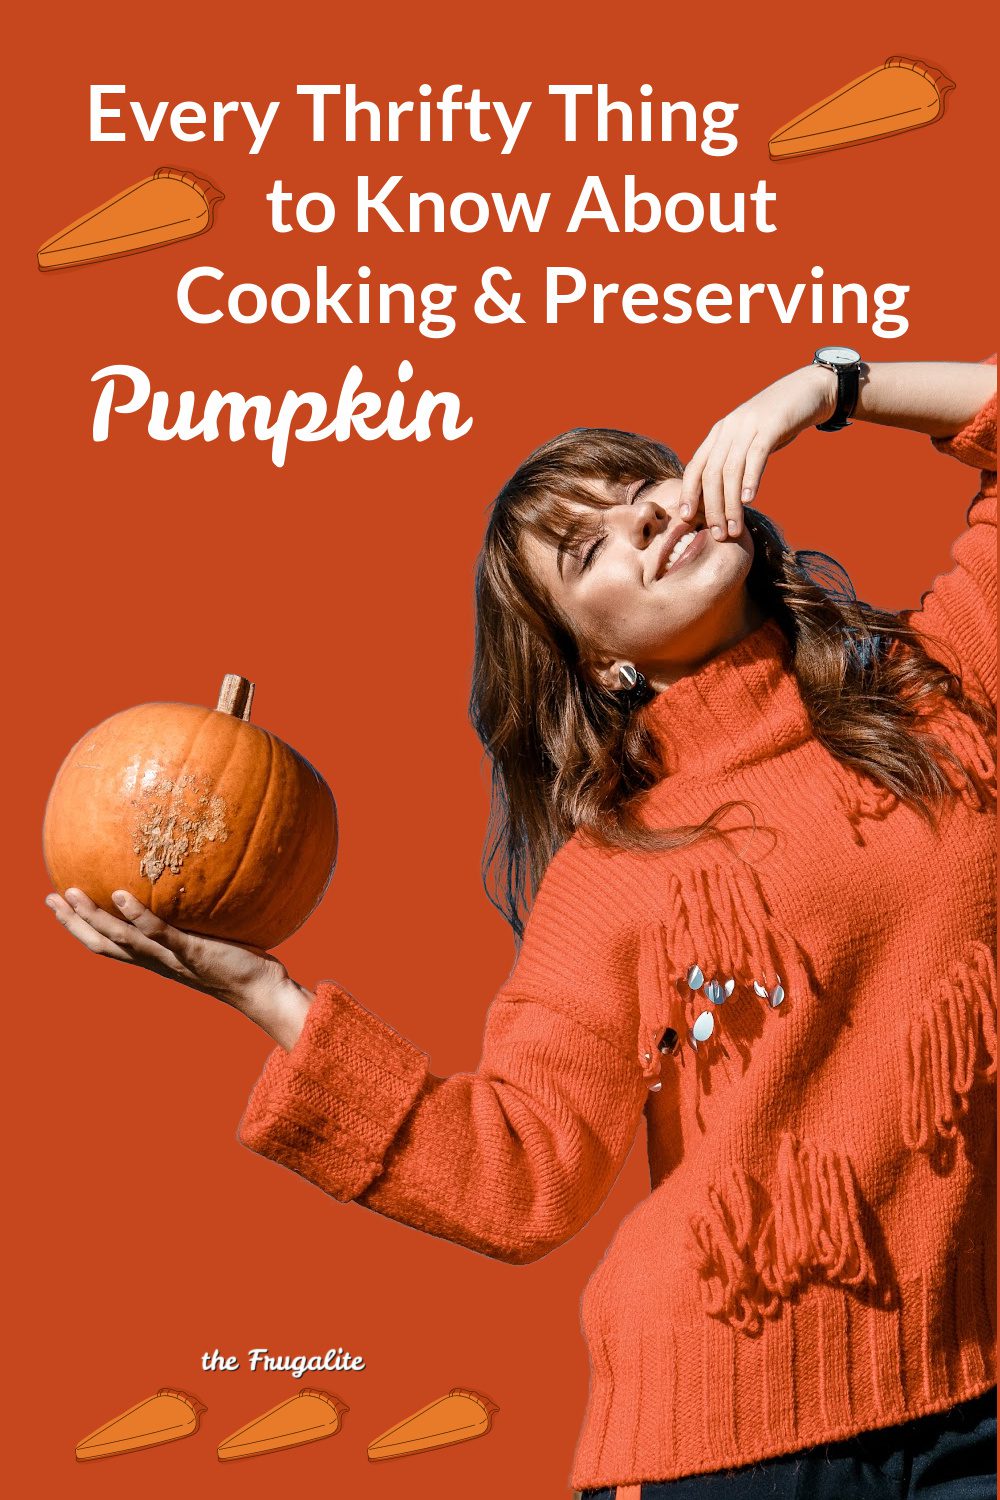 Every Thrifty Thing to Know About Cooking and Preserving Pumpkin